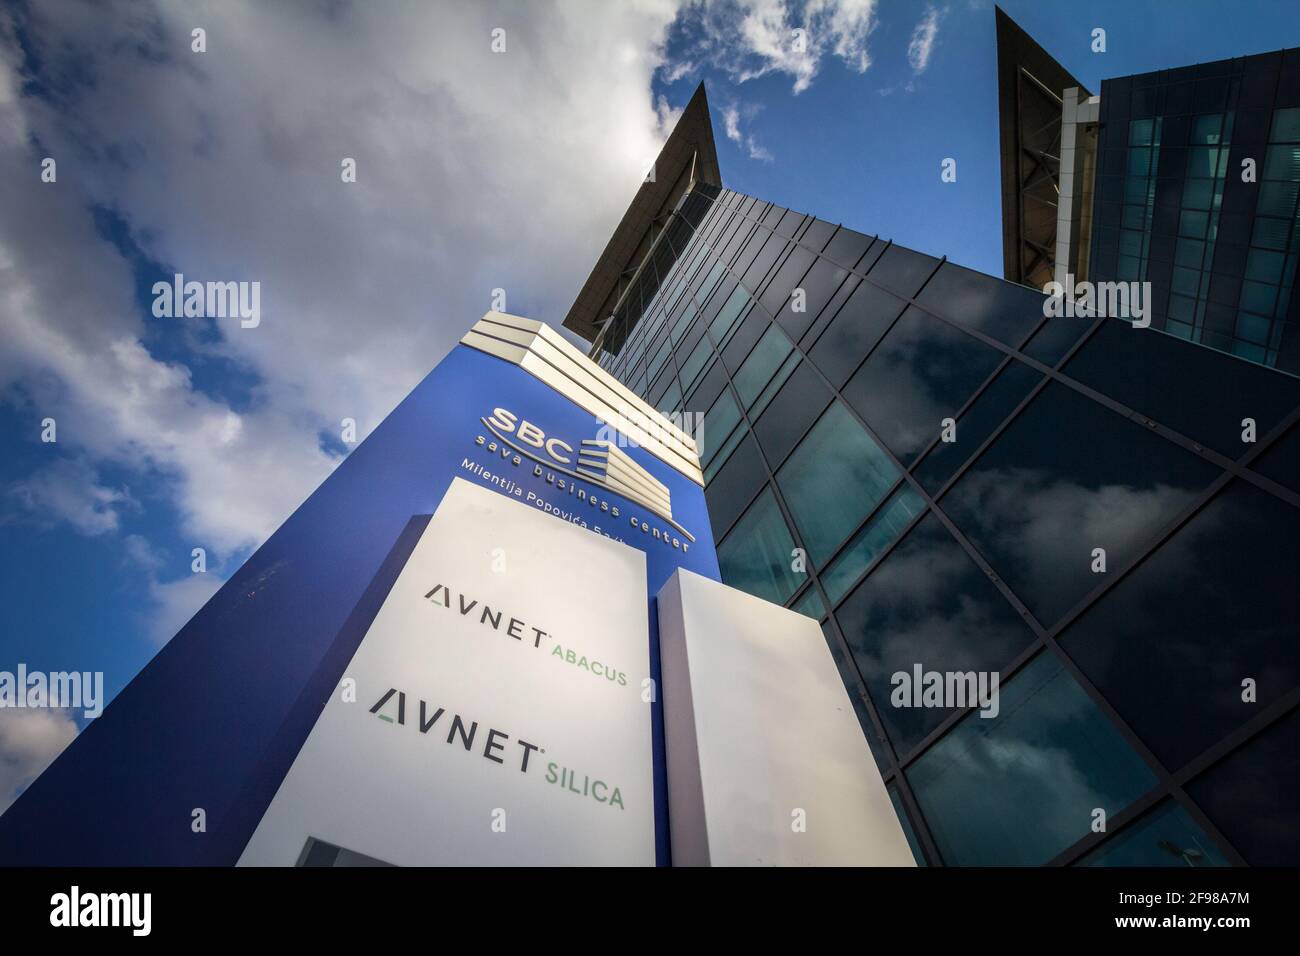 BELGARDE, SERBIA - MAY 31, 2020: Avnet Silica and Abacus logos in front of their main offices for Belgrade. Avnet is an american producer and manufact Stock Photo